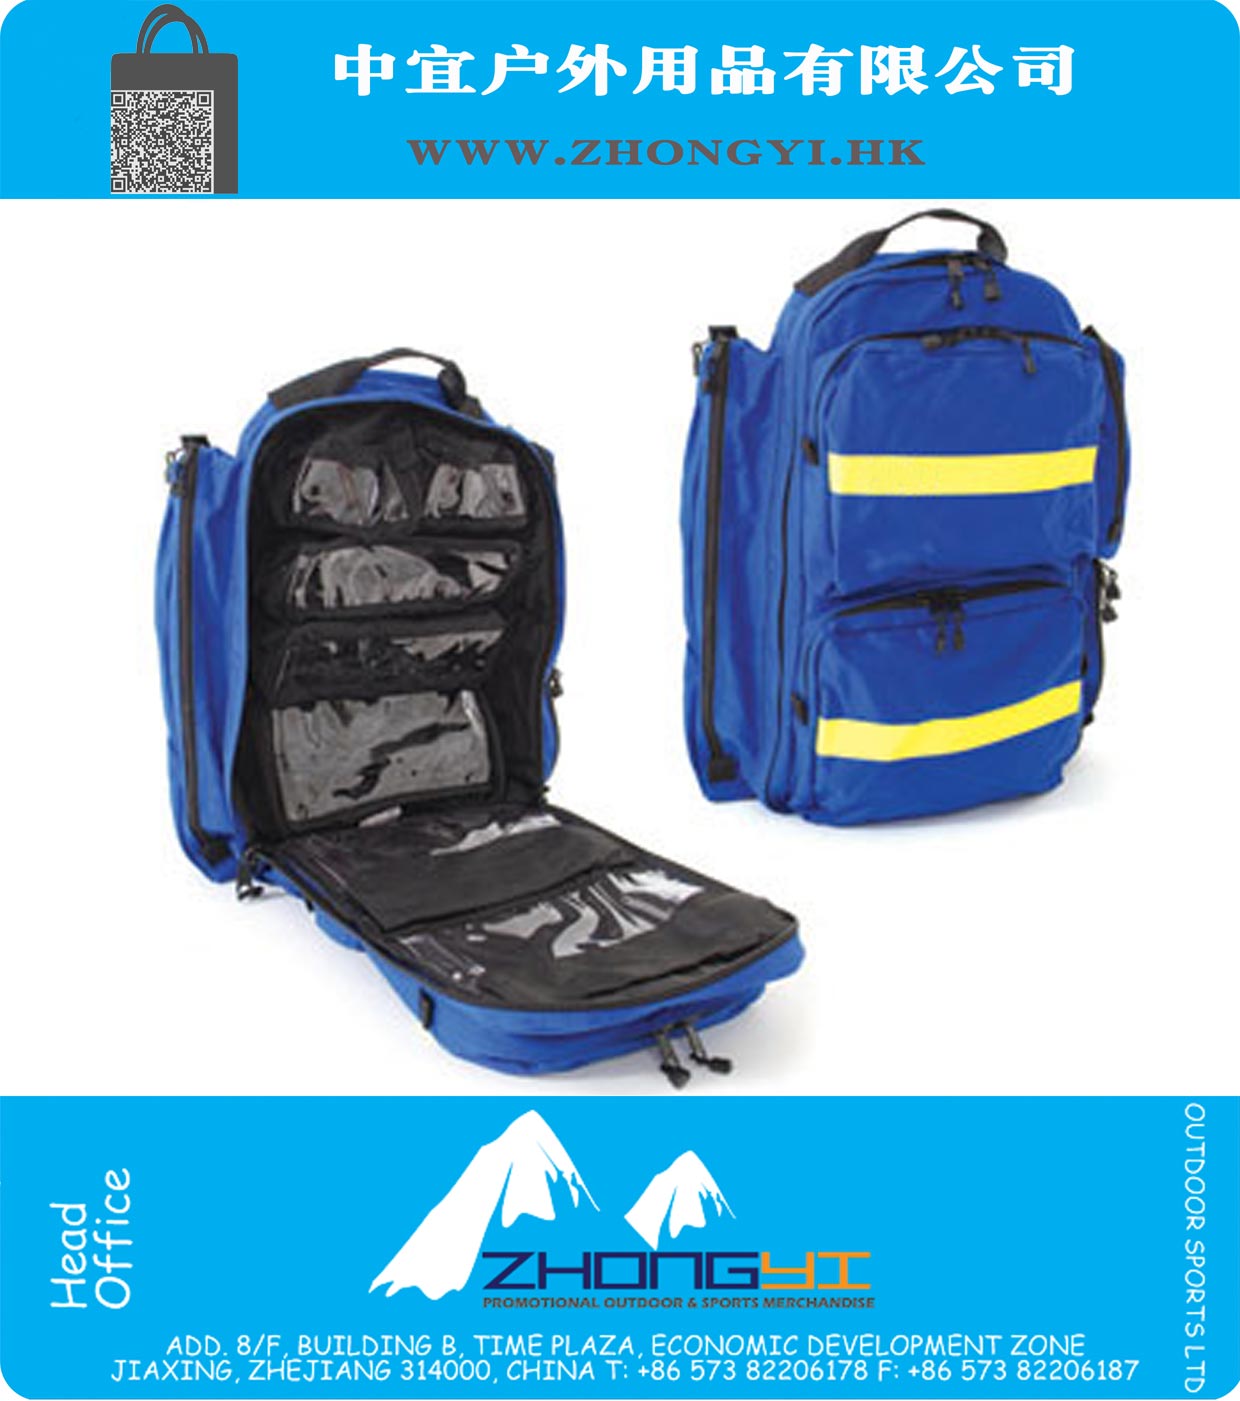 Paramedic Rescue Backpack